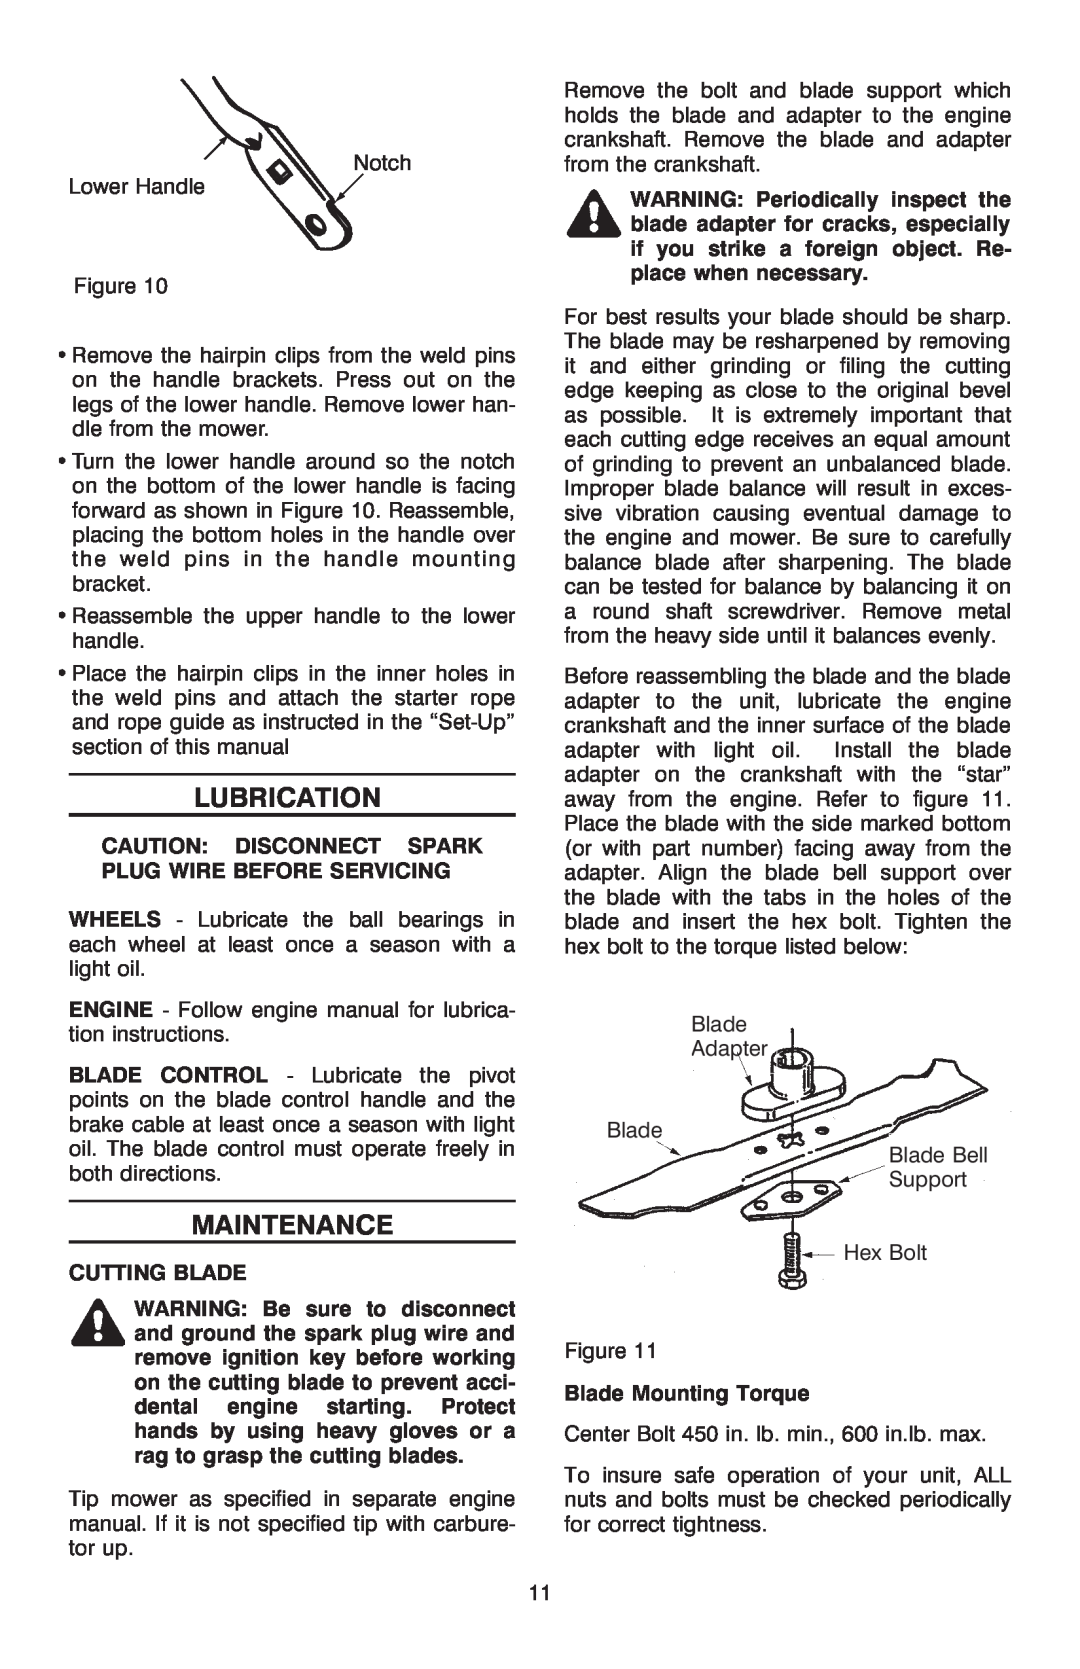 Troy-Bilt T-106 owner manual Lubrication, Maintenance, Caution Disconnect Spark Plug Wire Before Servicing, Cutting Blade 